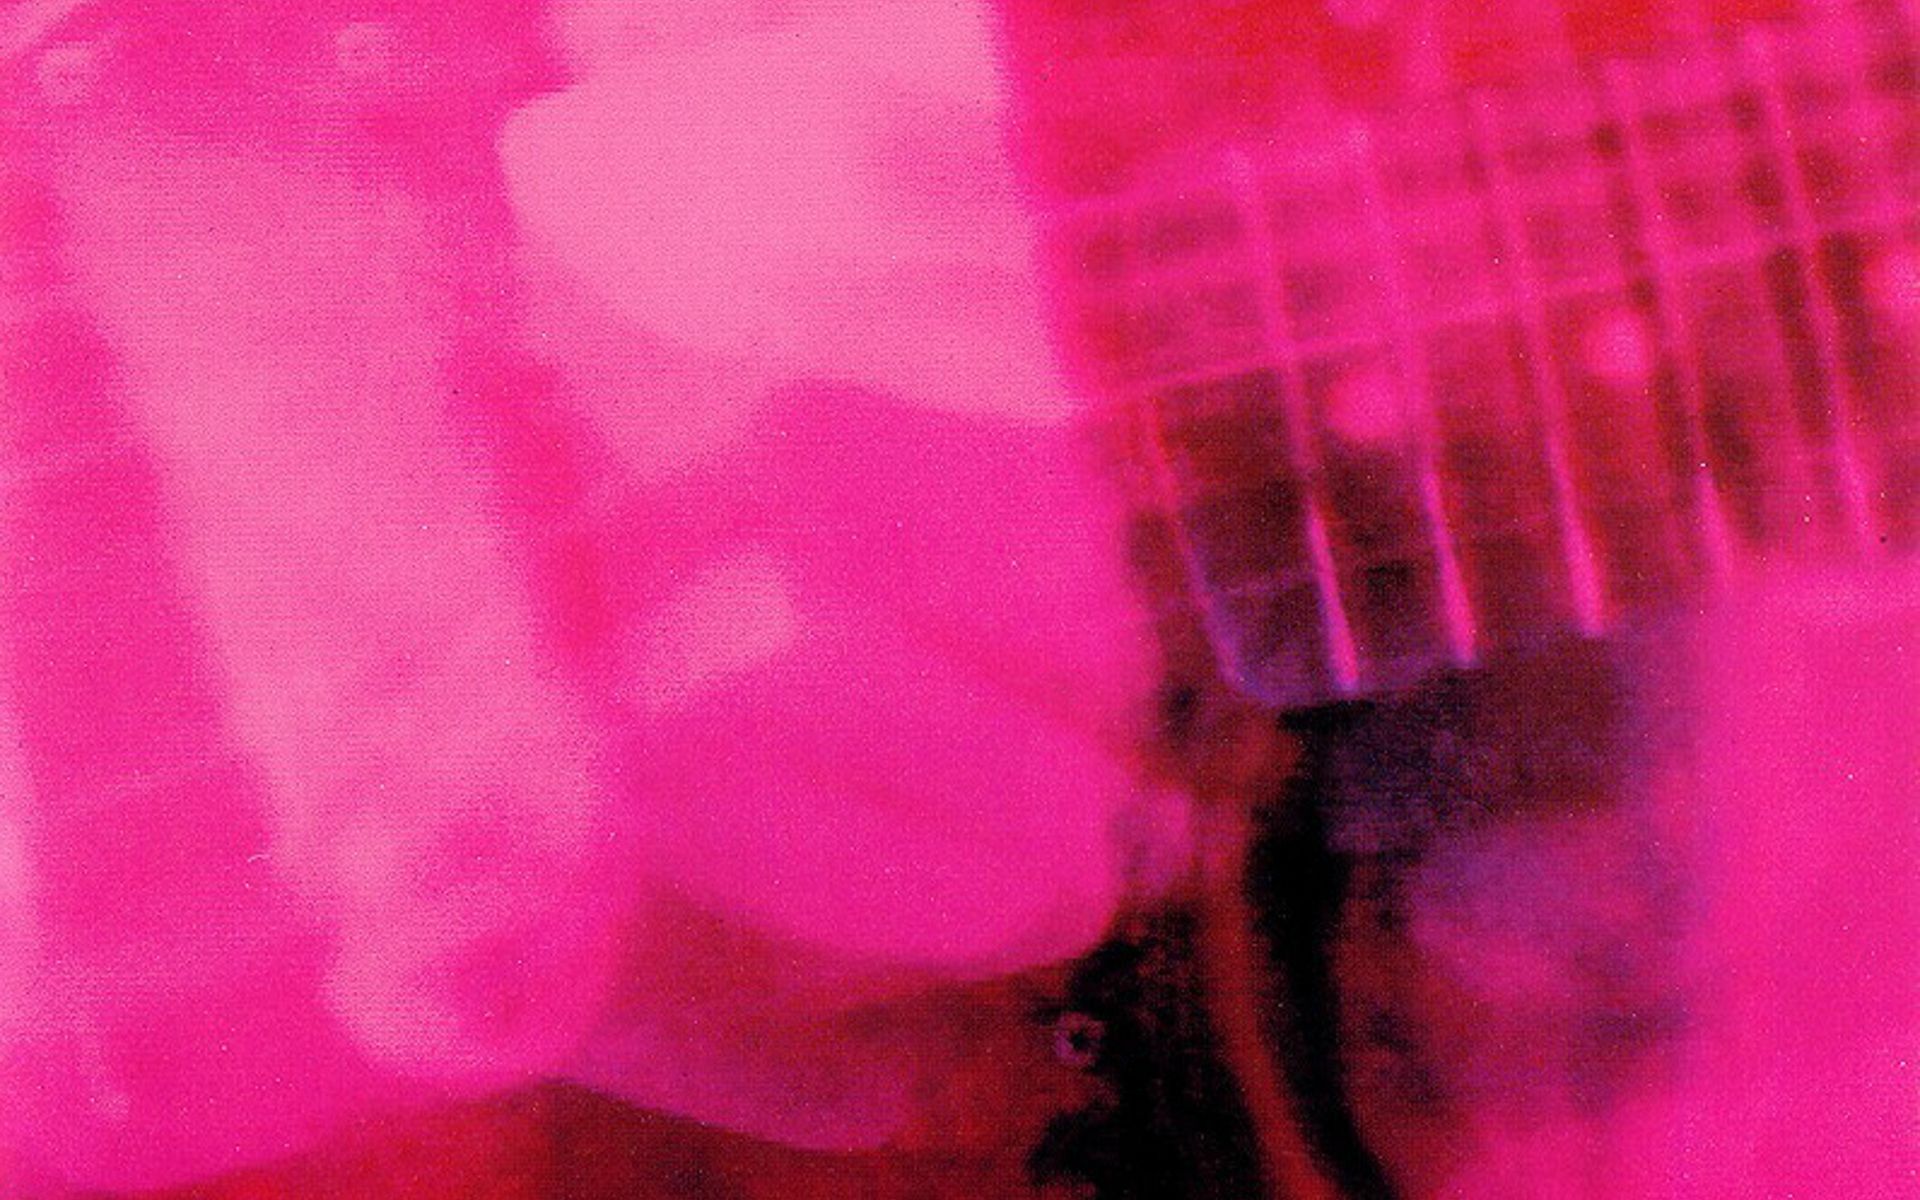 From The Crate: My Bloody Valentine - Loveless